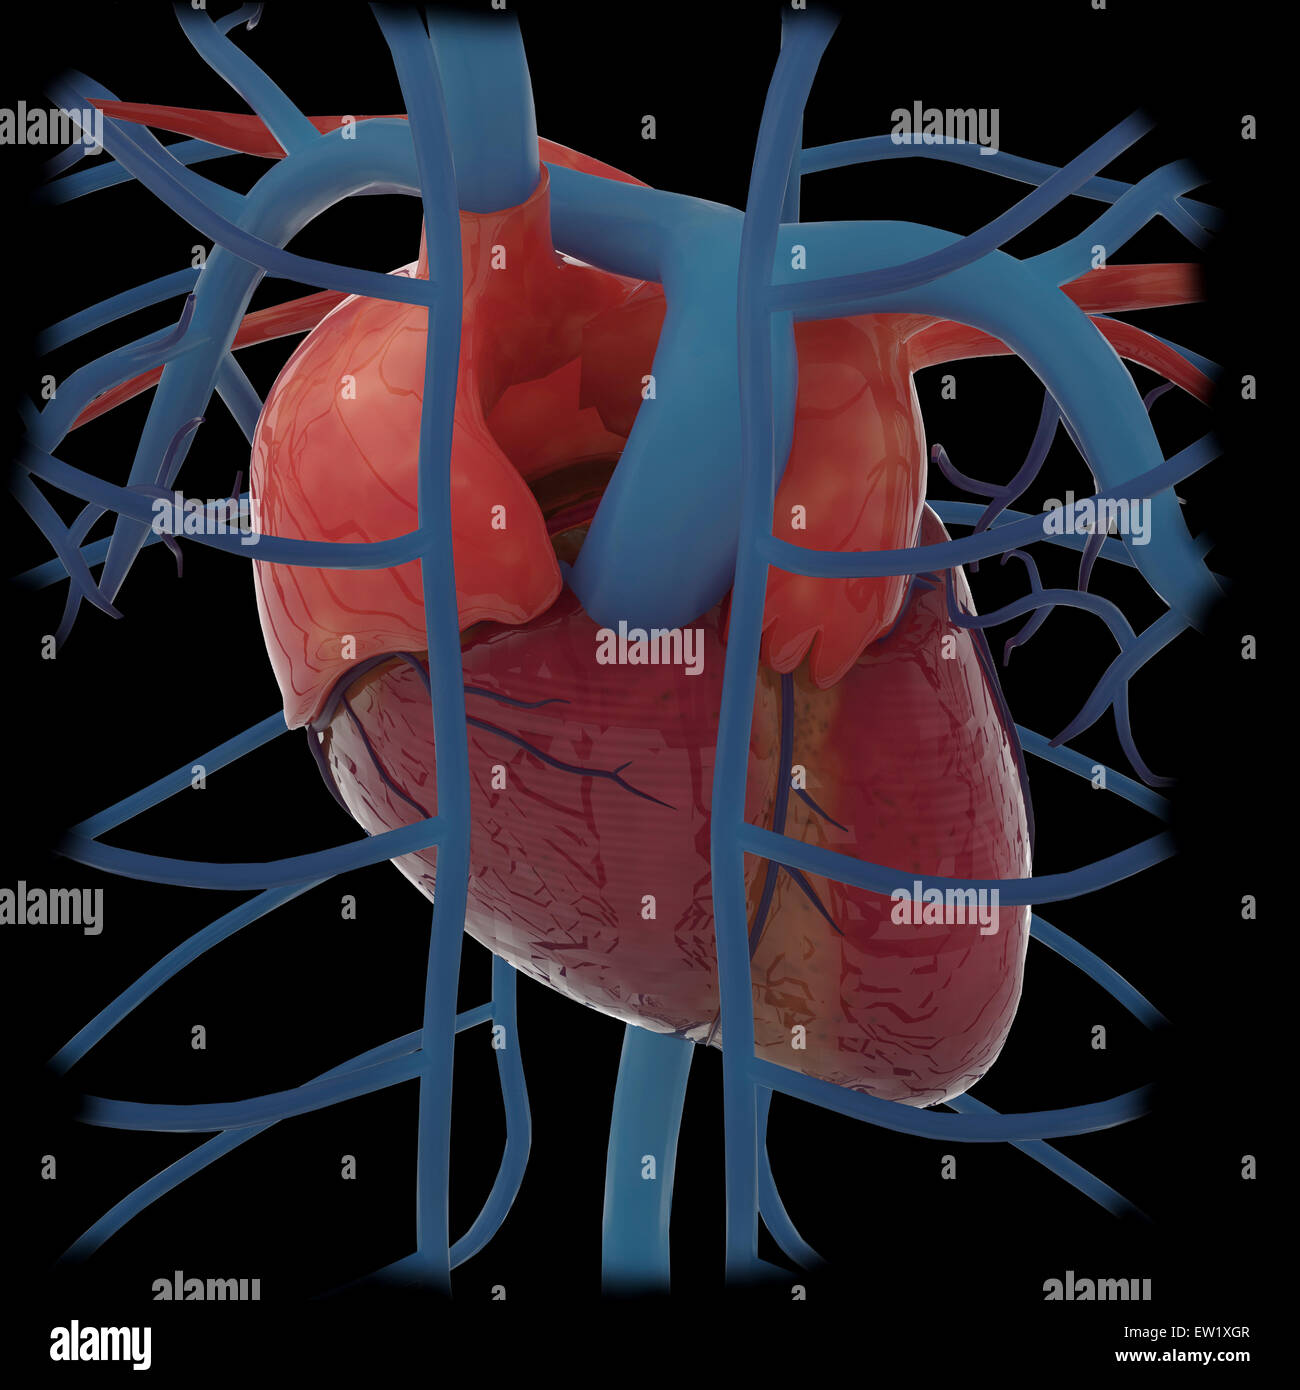 3D rendering of human heart and thoracic veins. Stock Photo